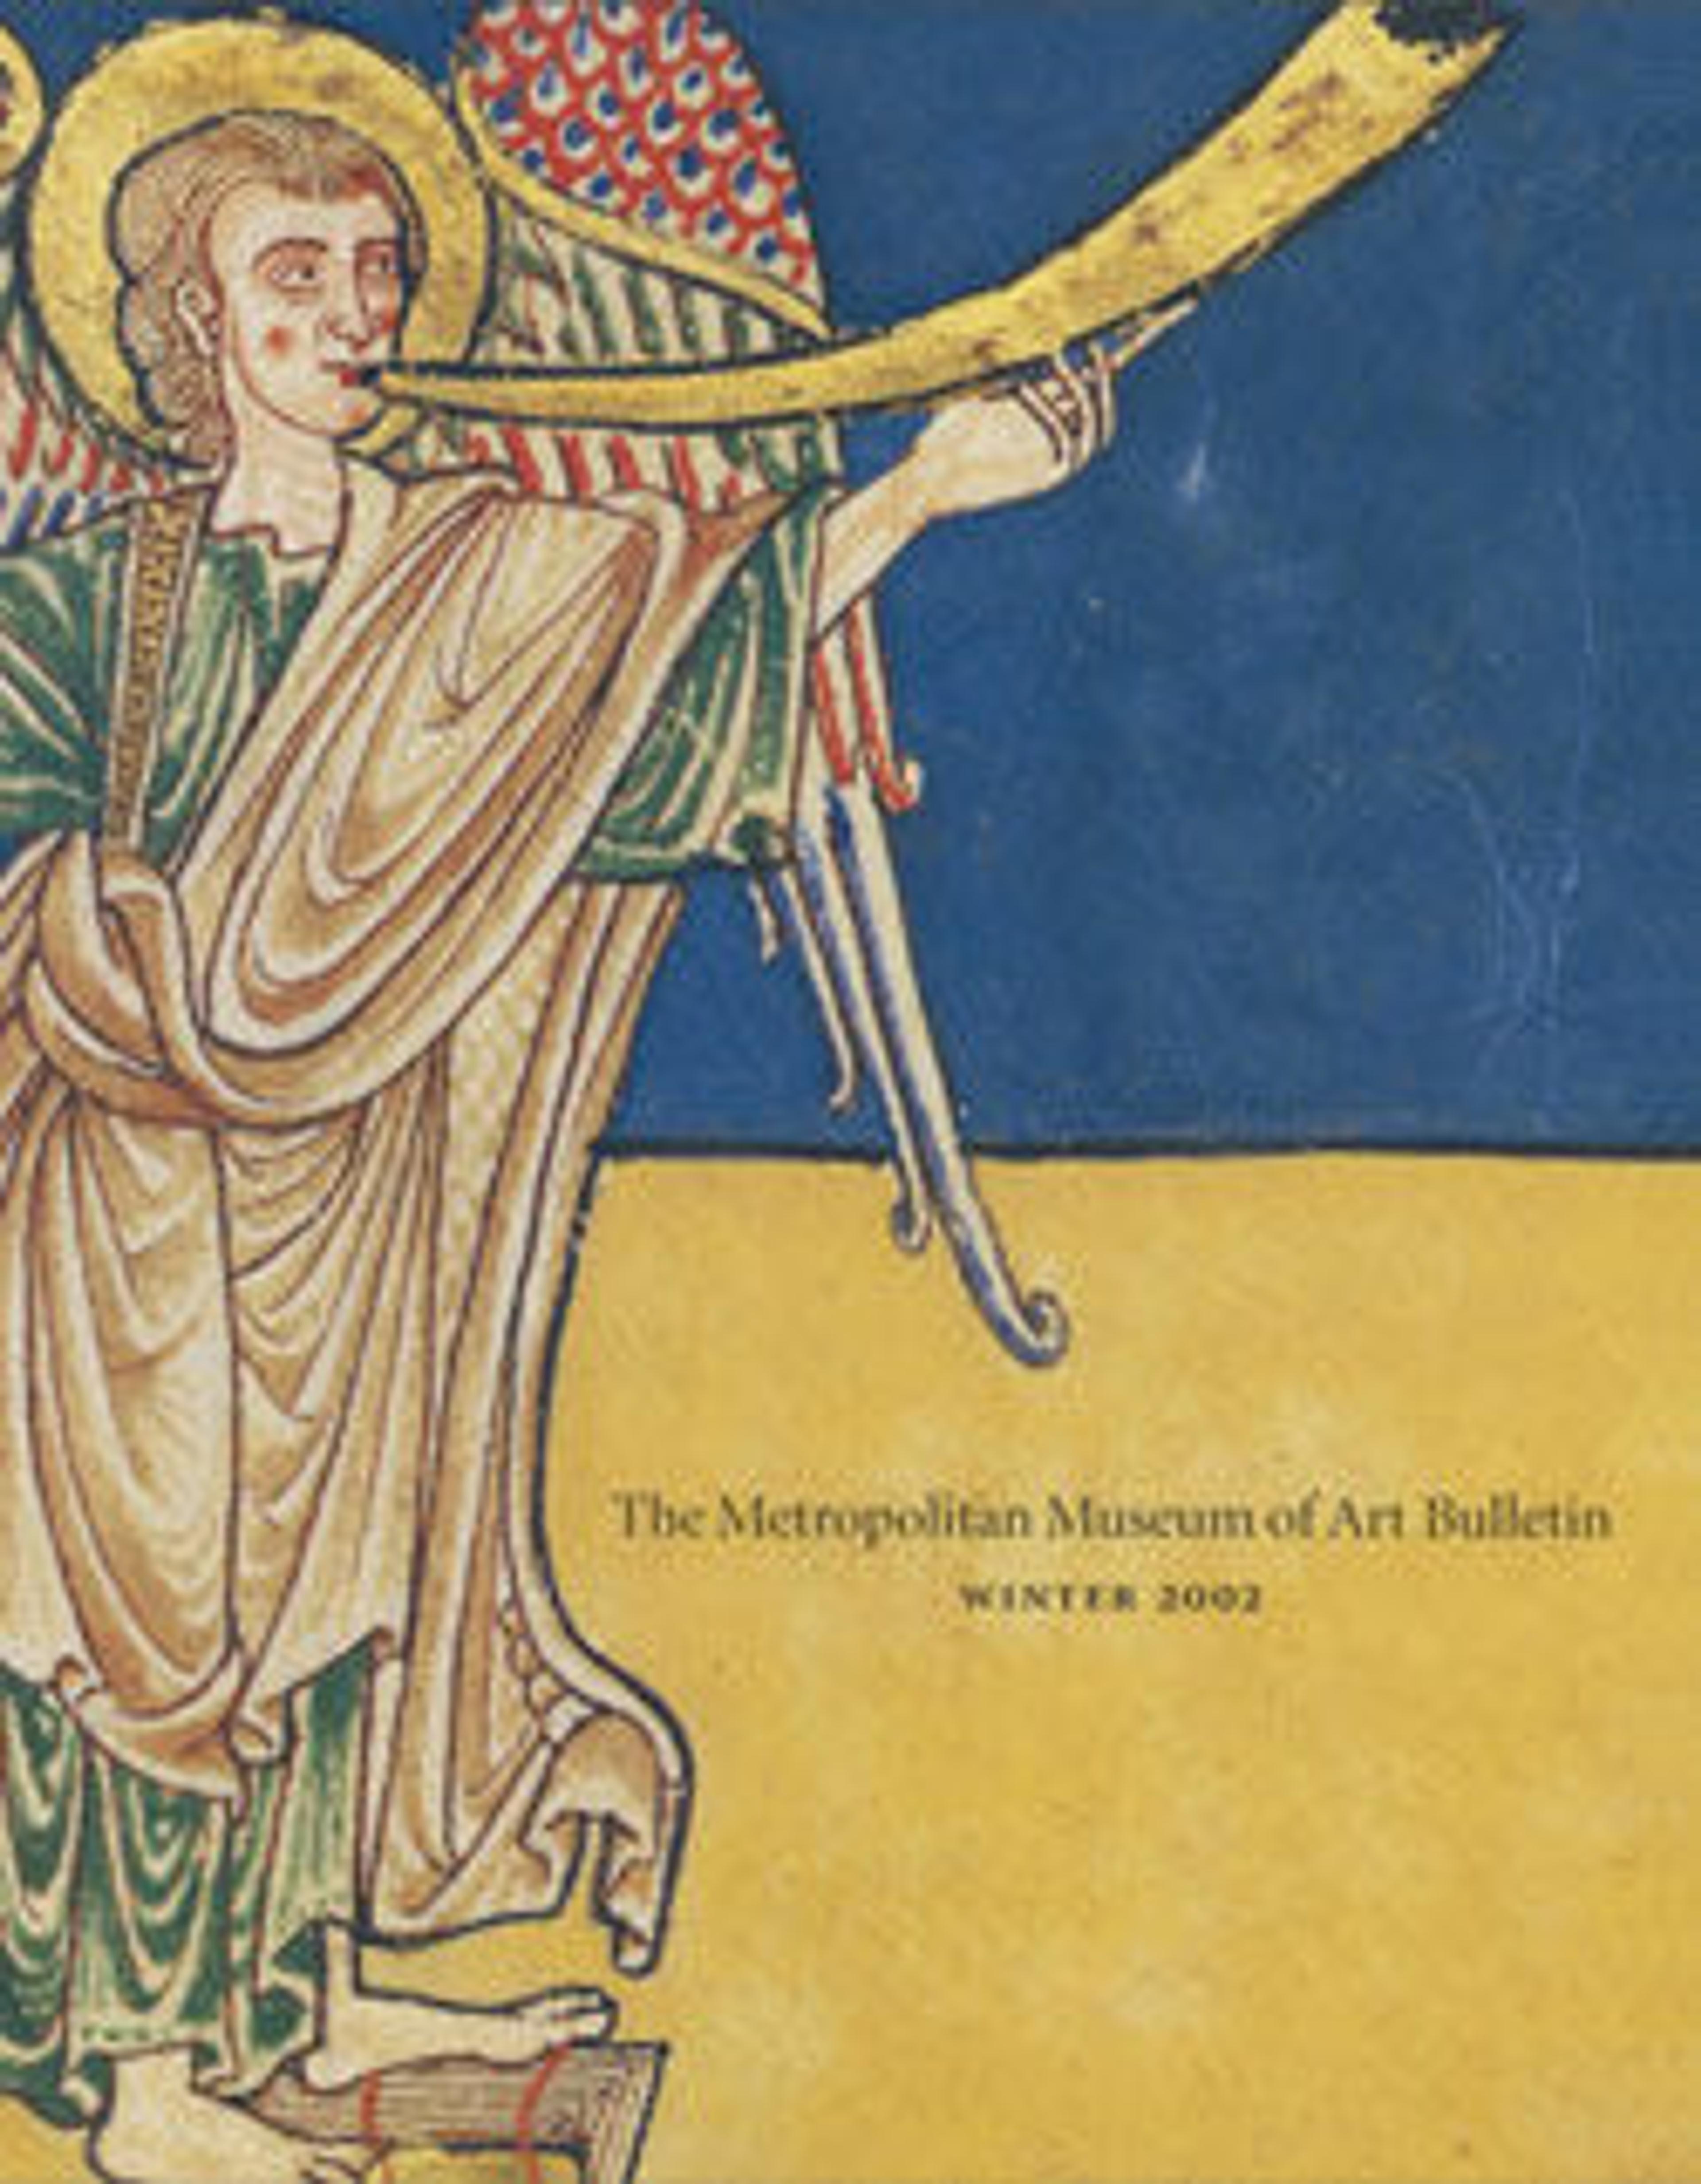 "Picturing the Apocalypse: Illustrated Leaves from a Medieval Spanish Manuscript": The Metropolitan Museum of Art Bulletin, v. 59 no. 3 (Winter, 2002)